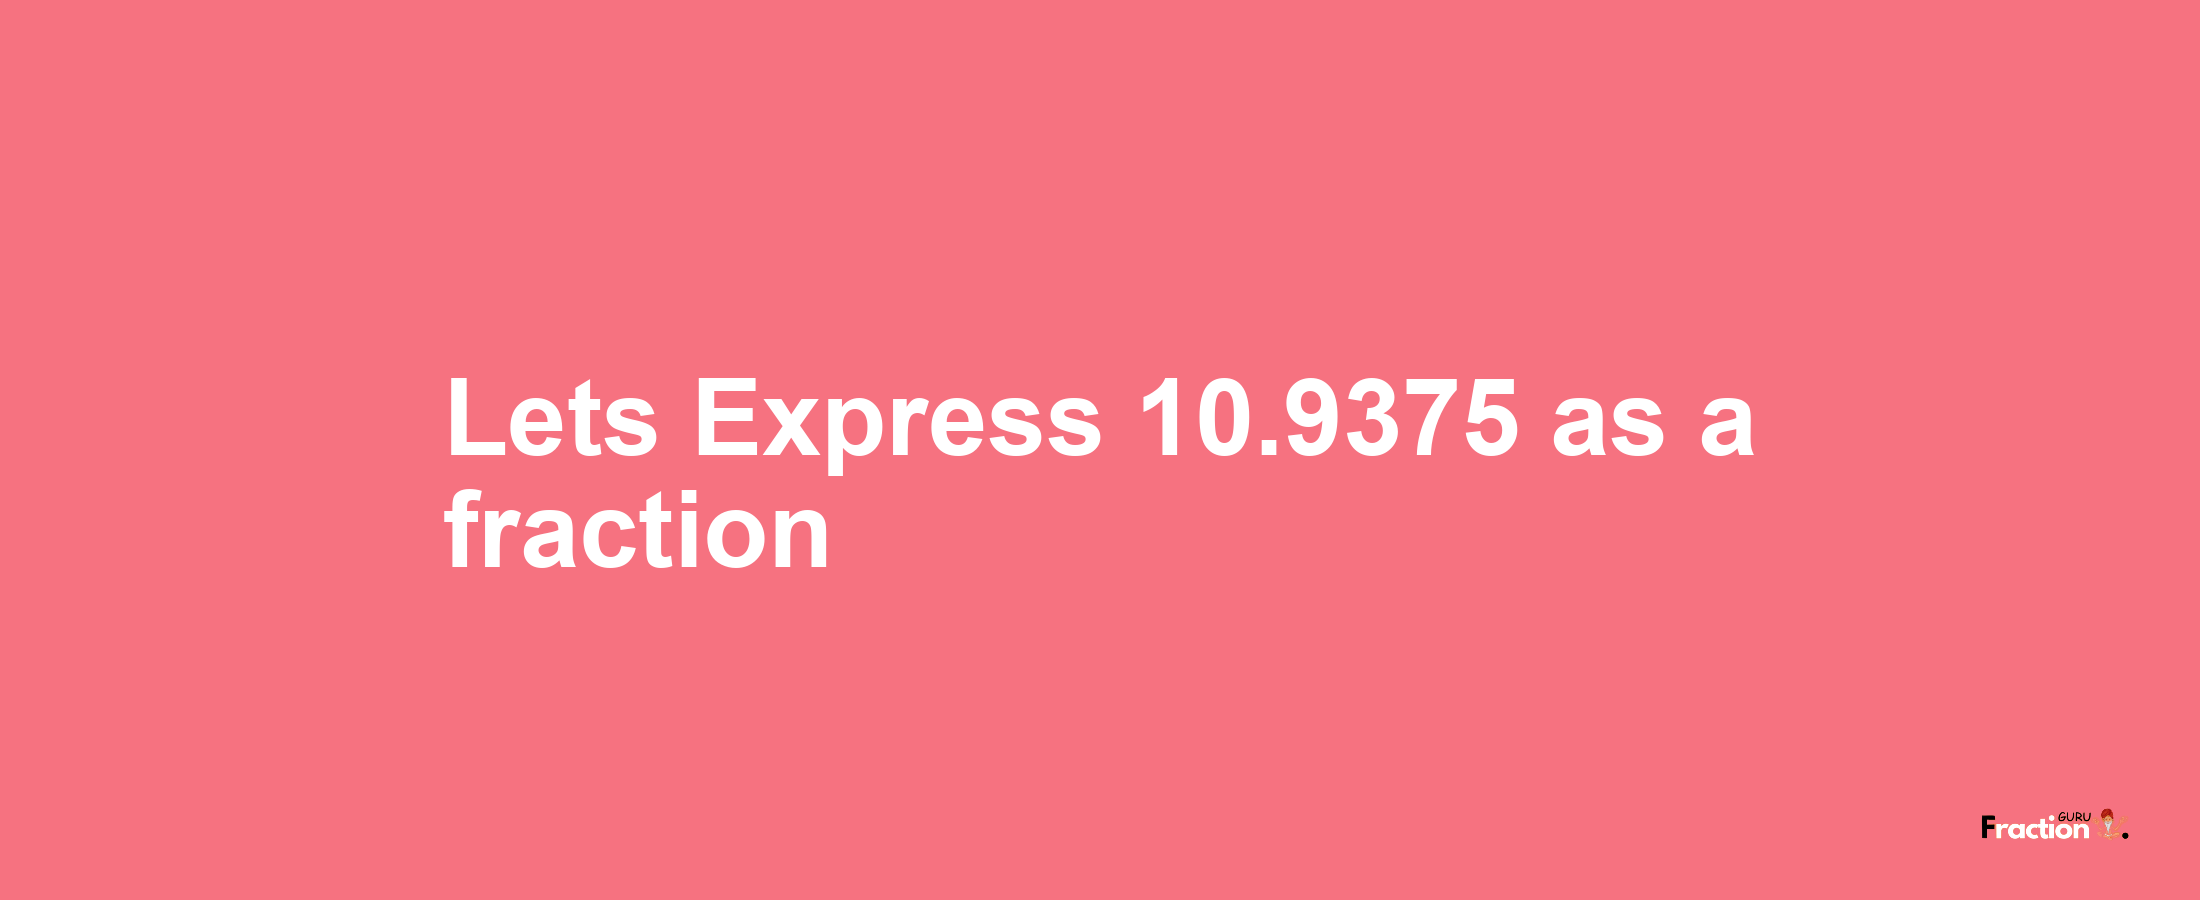 Lets Express 10.9375 as afraction